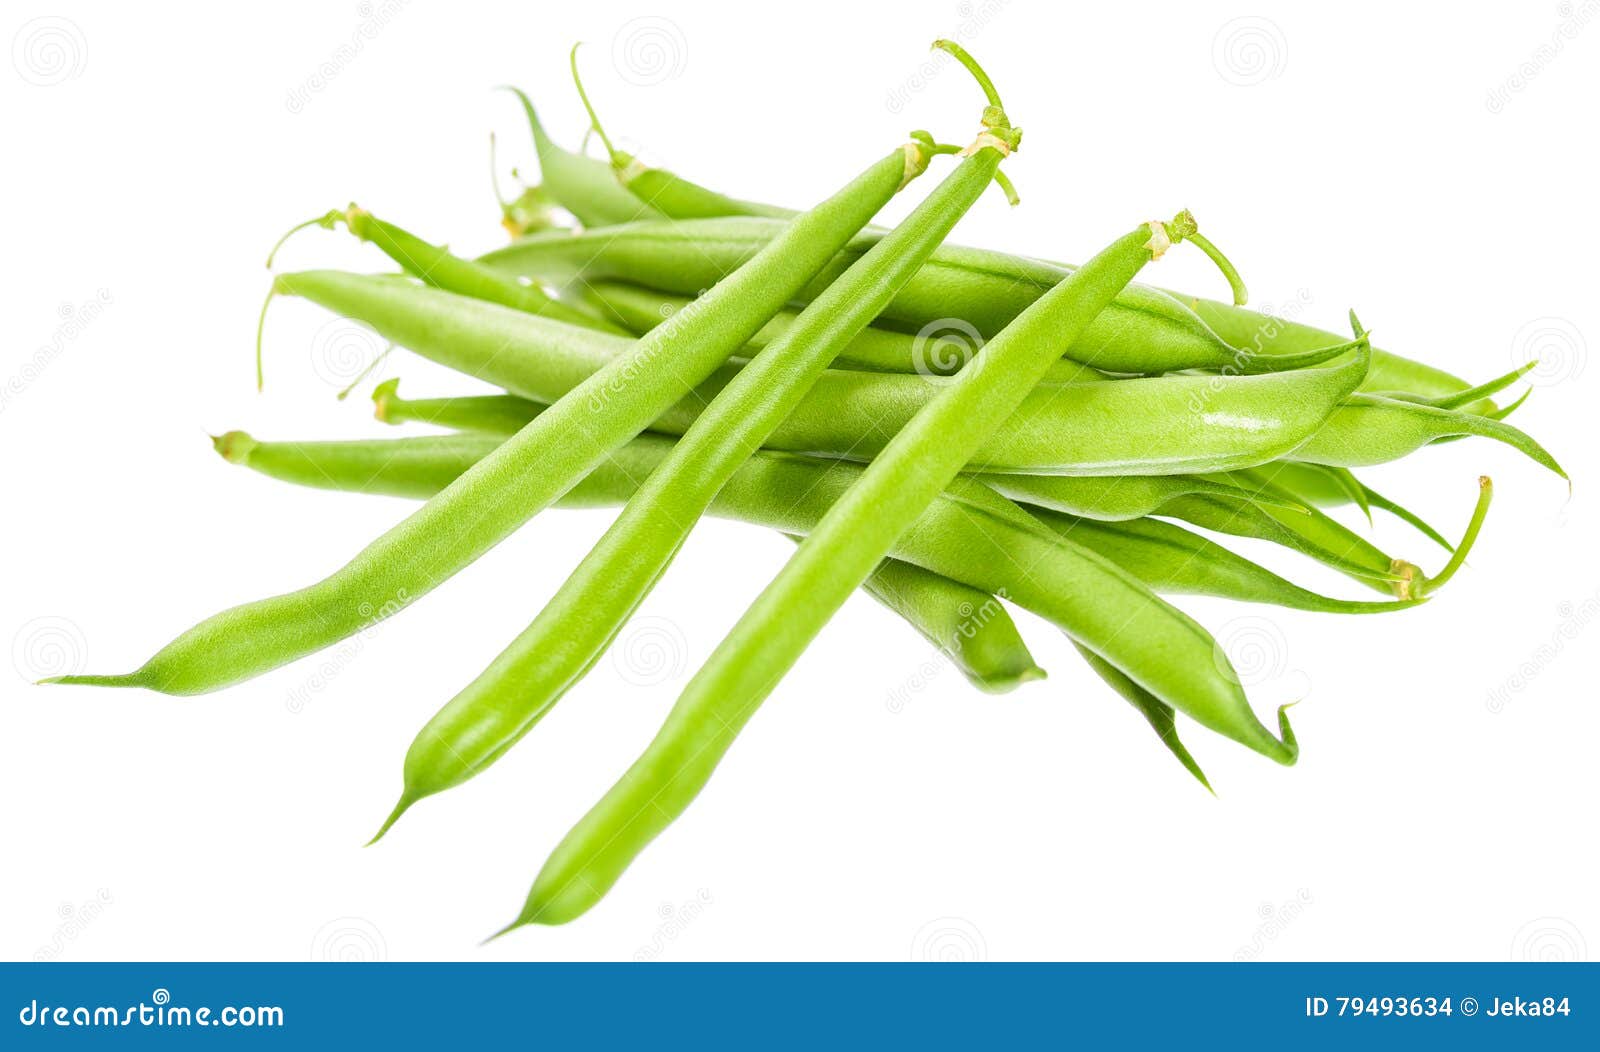 Beautiful Fresh Young Pods of Kidney Beans Stock Photo - Image of batch ...